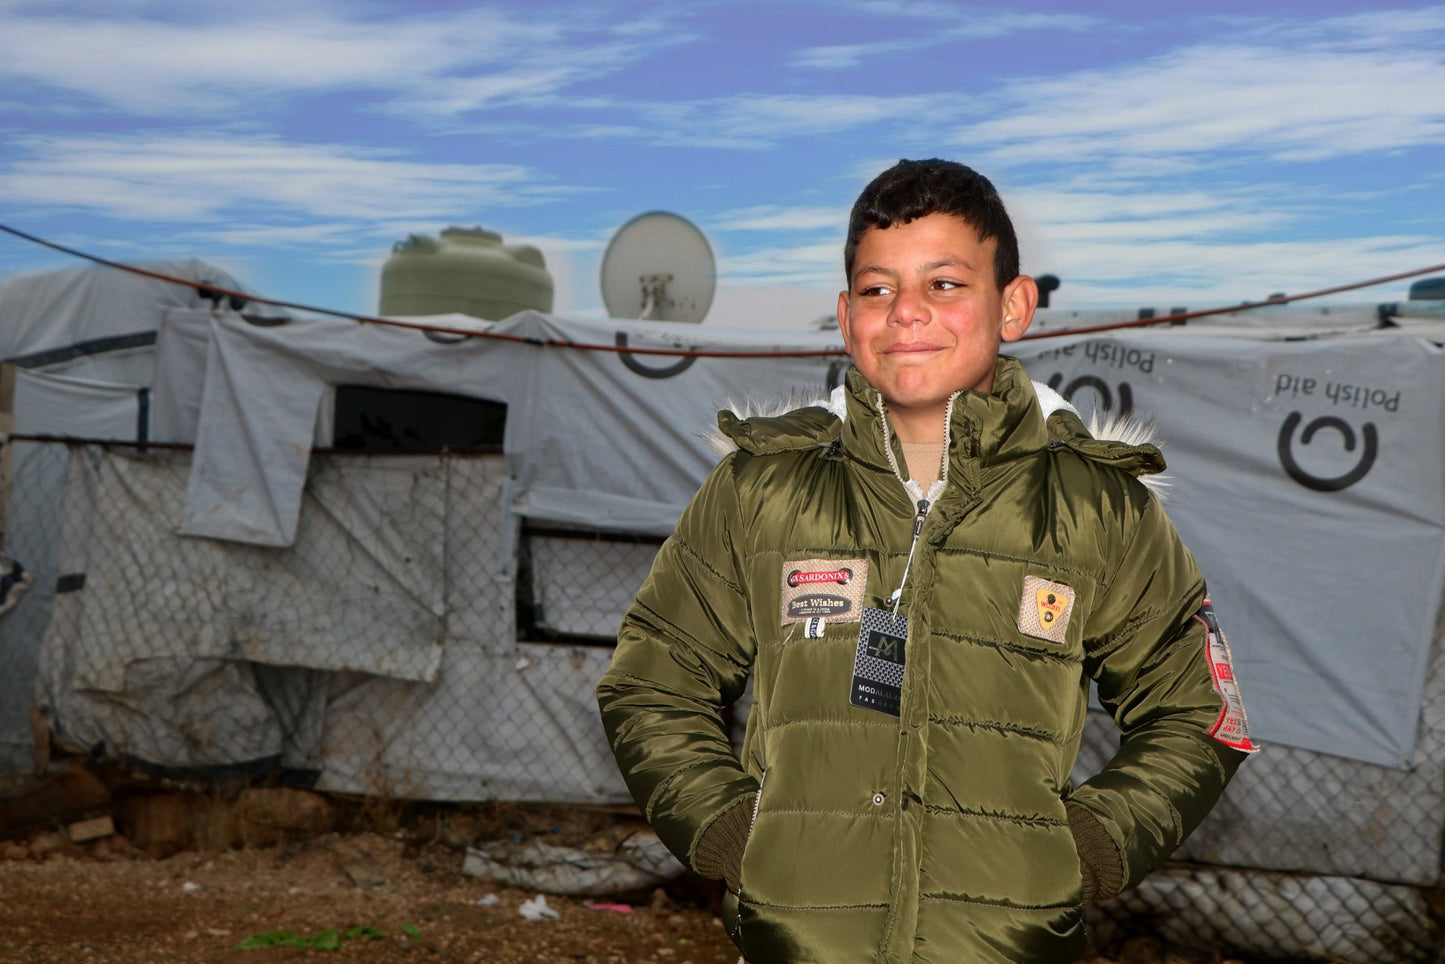 A young boy dressed for winter, in a refugee camp. Behind there is improvised accommodation covered by plastic sheets.